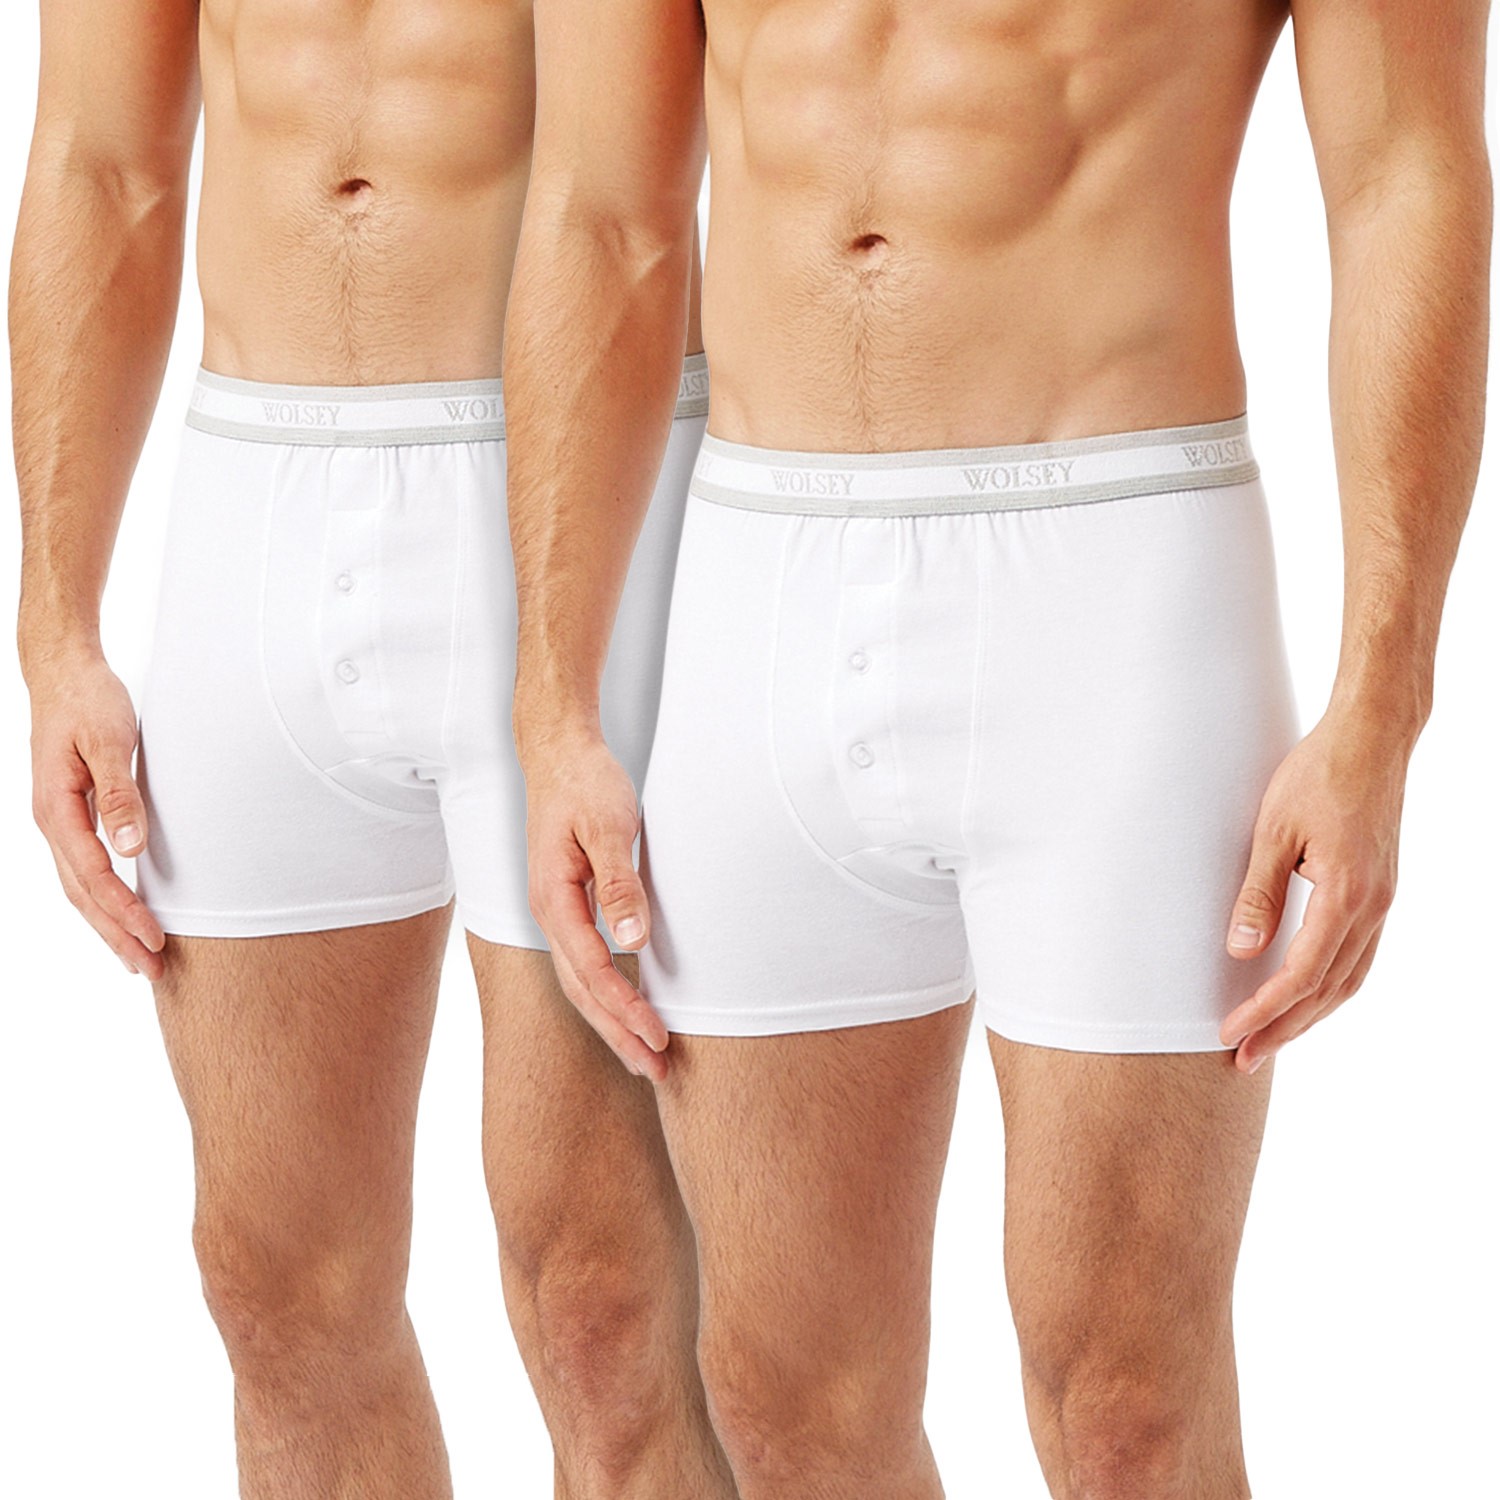 Wolsey Boxer Brief